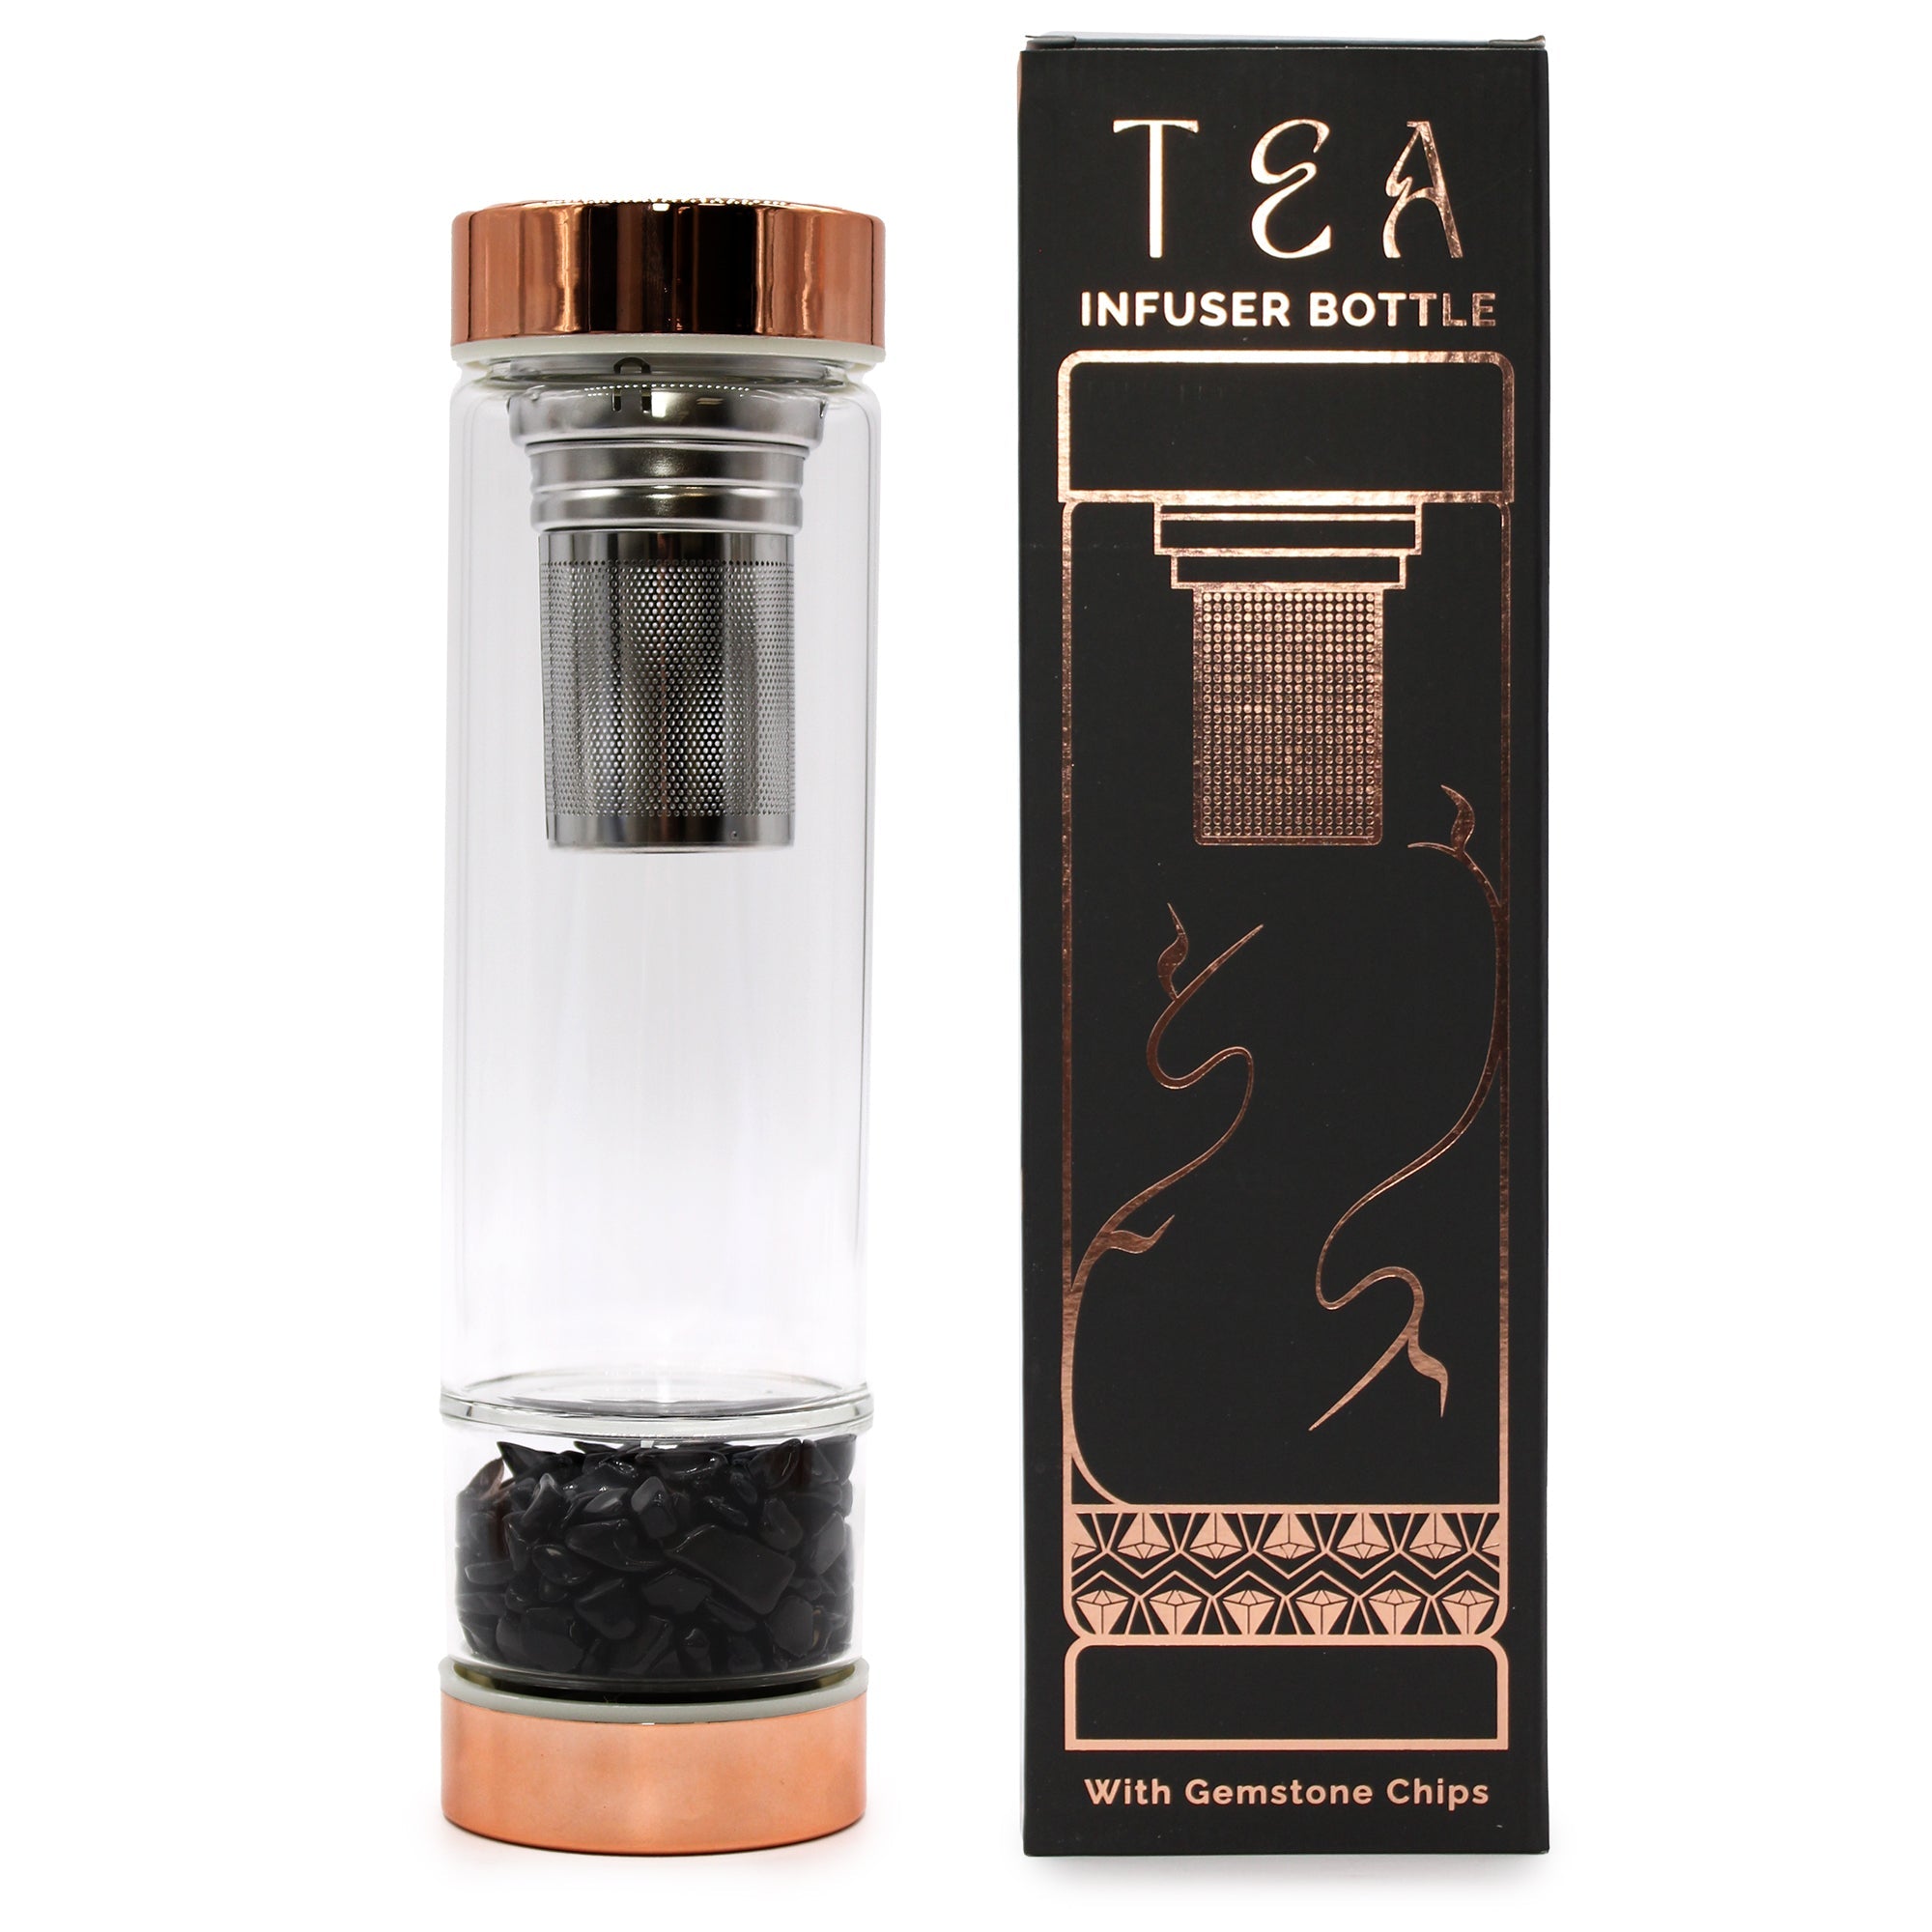 View Crystal Glass Tea Infuser Bottle Rose Gold Onyx information